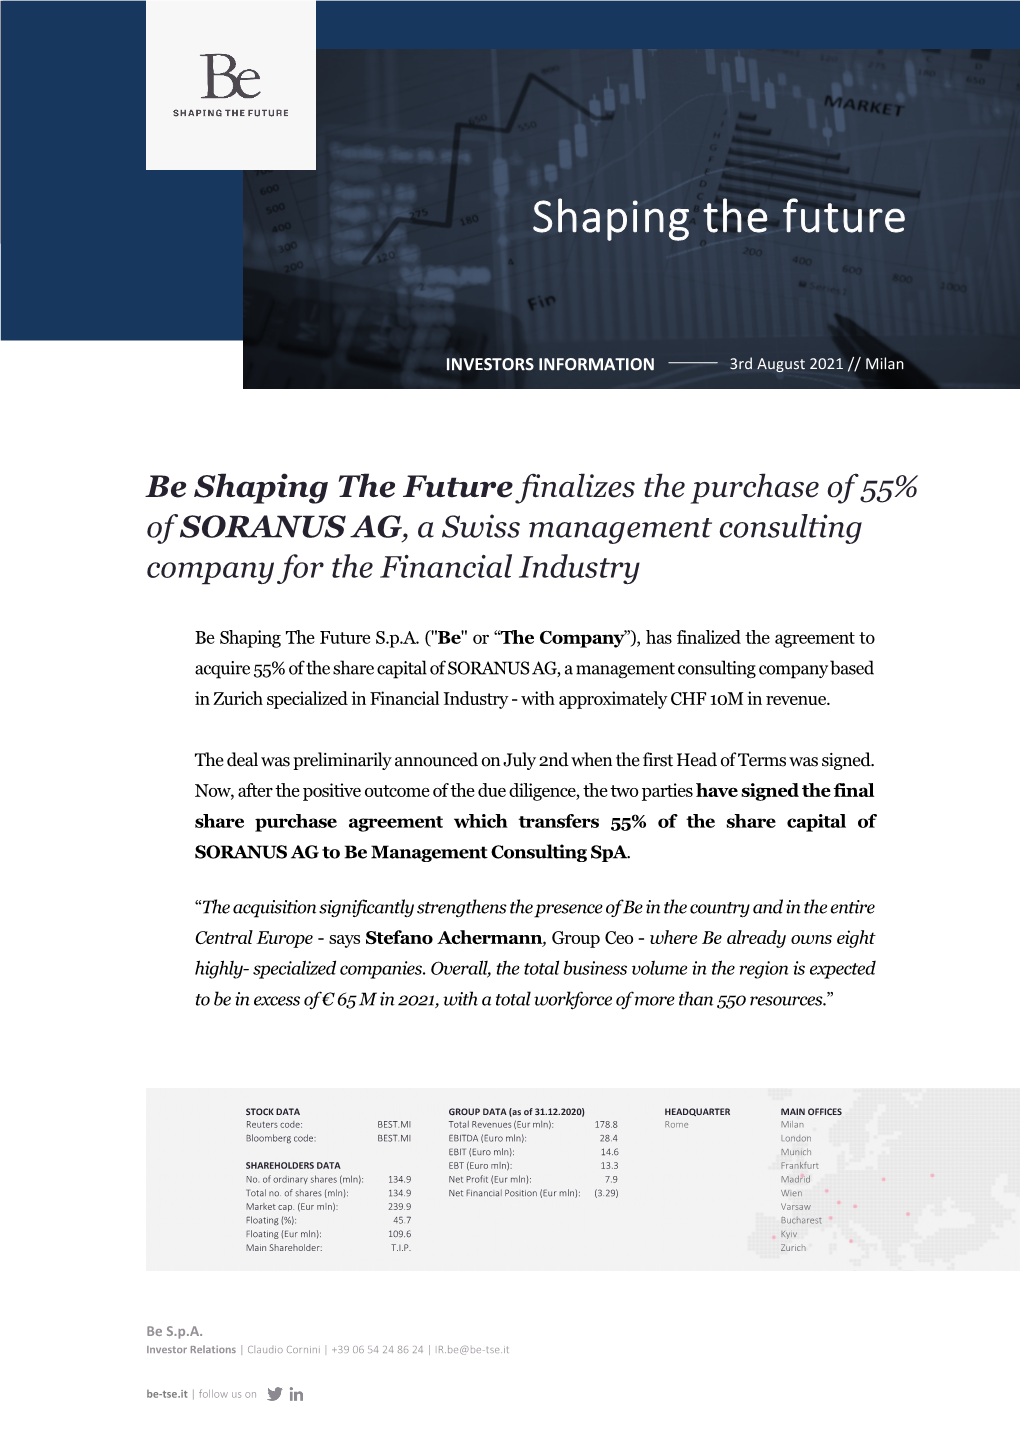 Be Shaping the Future Finalizes the Purchase of 55% of SORANUS AG, a Swiss Management Consulting Company for the Financial Industry